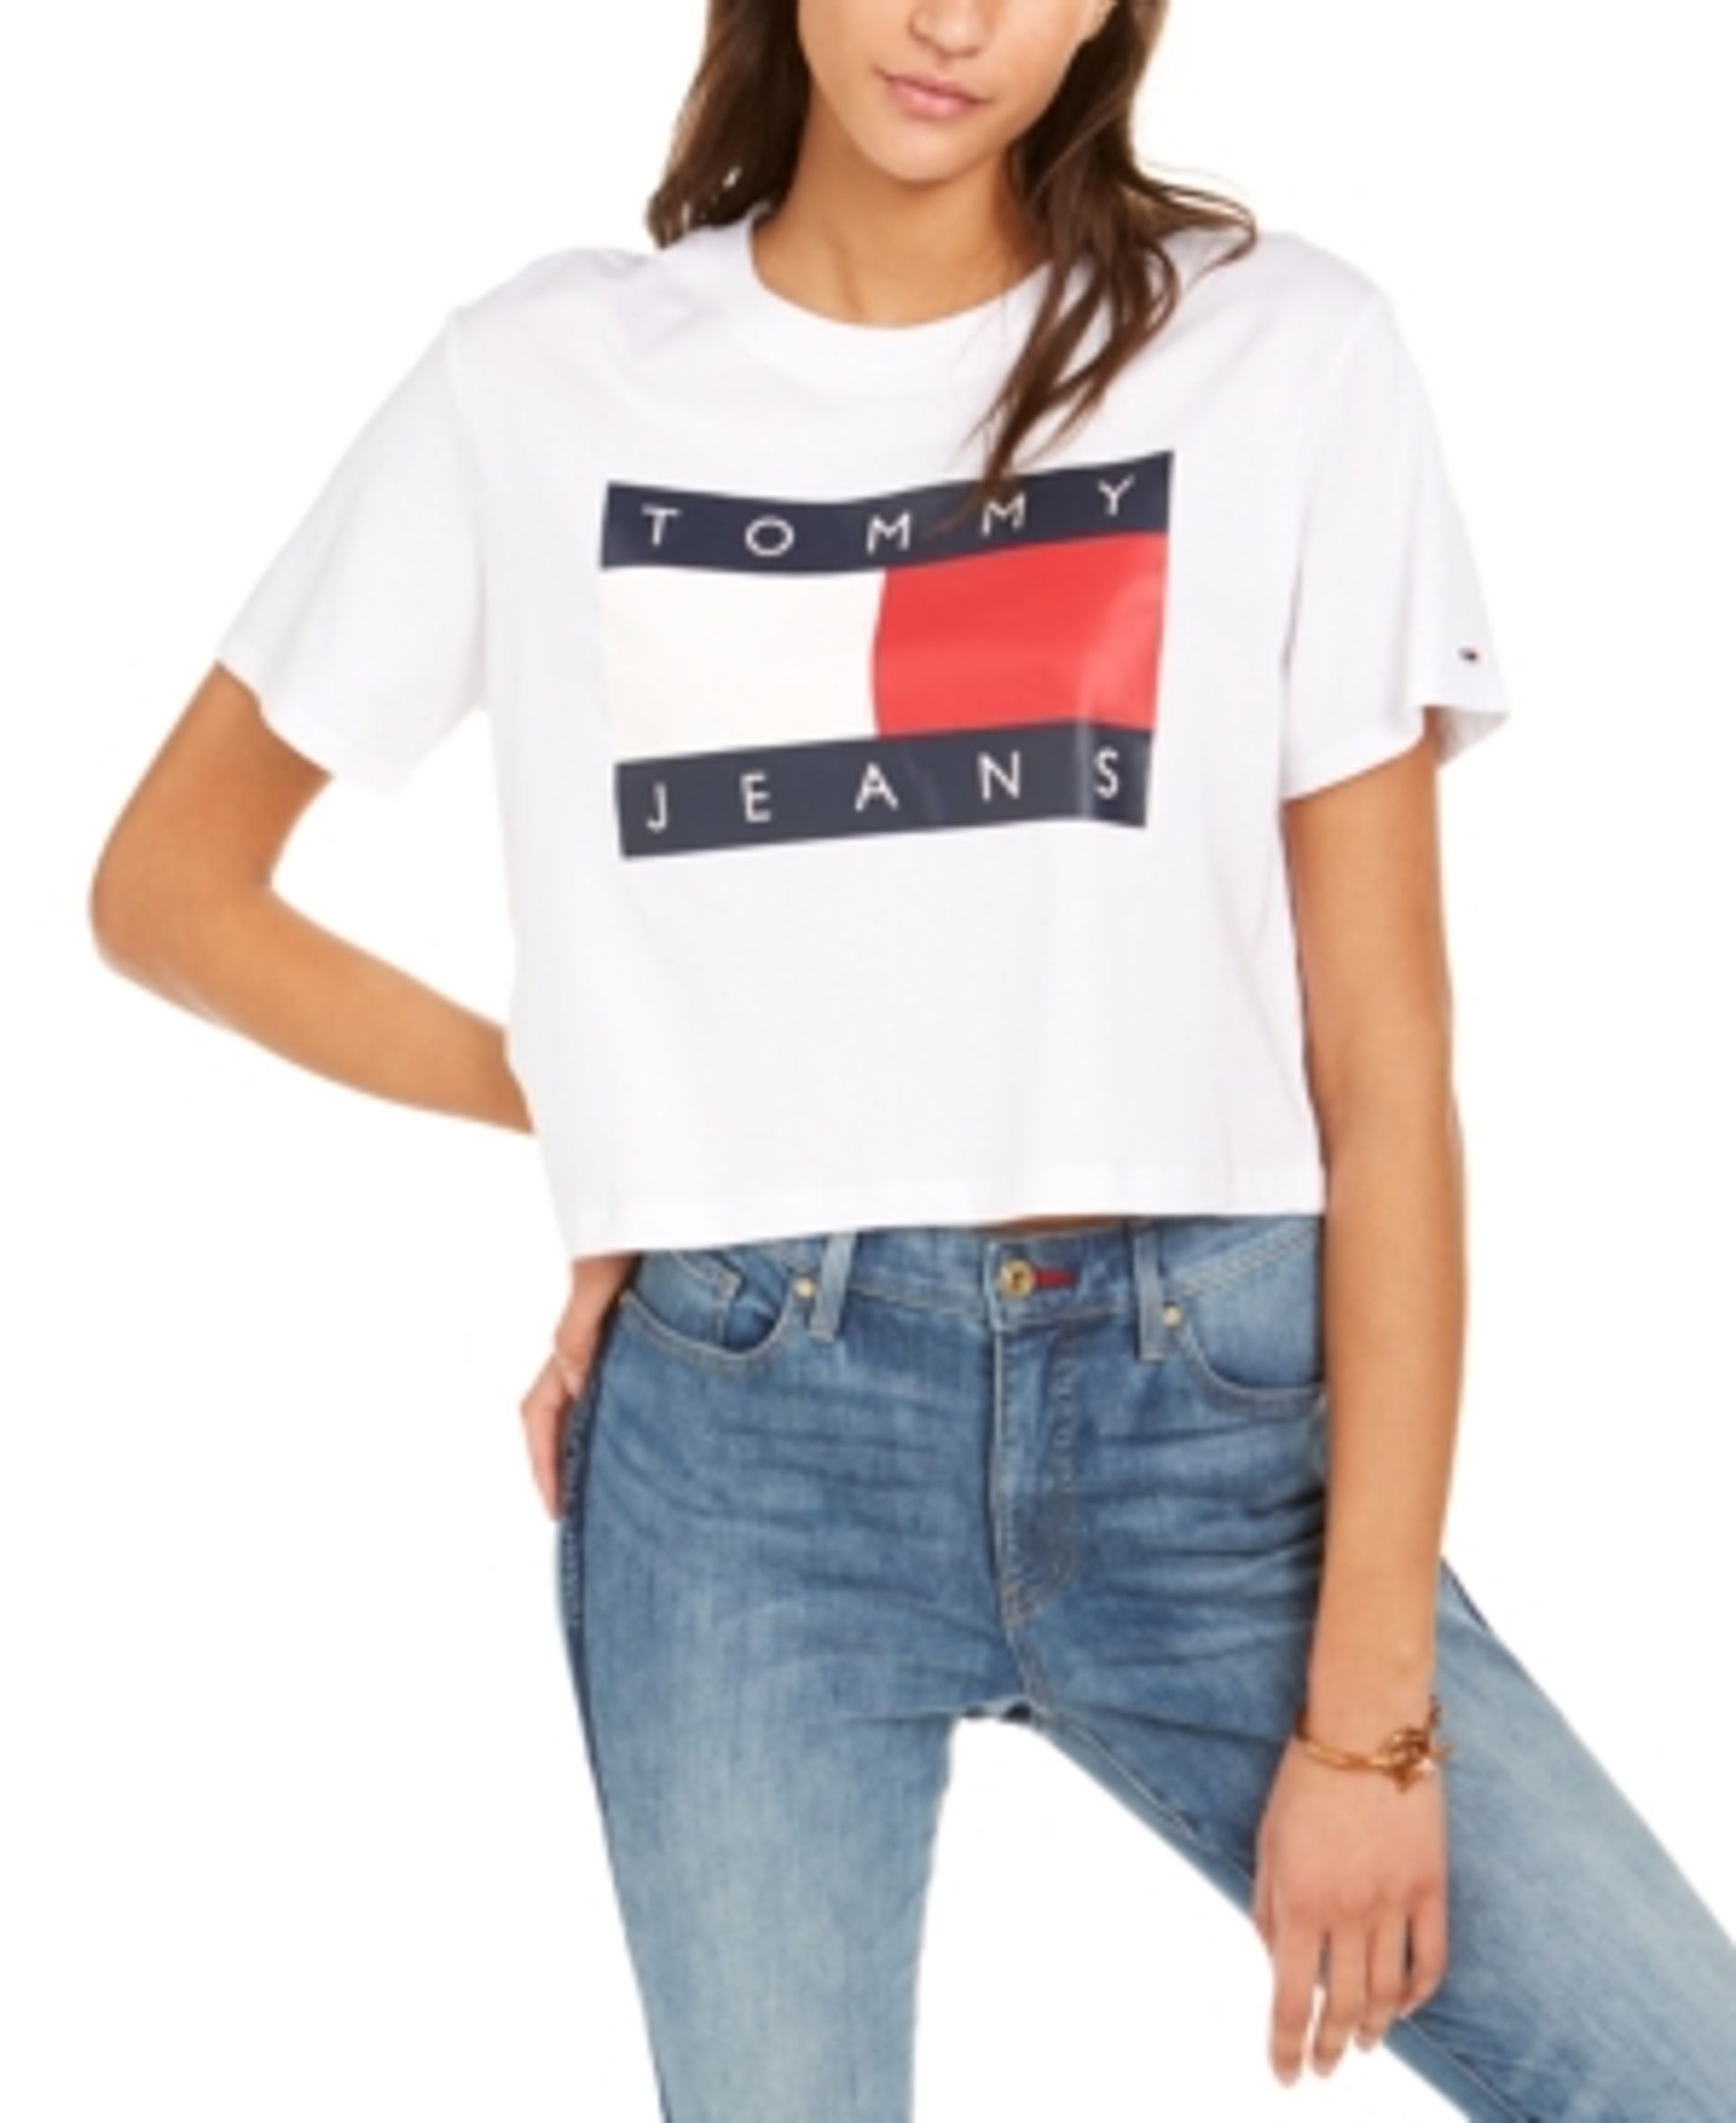 Jeans Cropped Style Crew - Logo Flag Macys Cotton Tommy T-Shirt